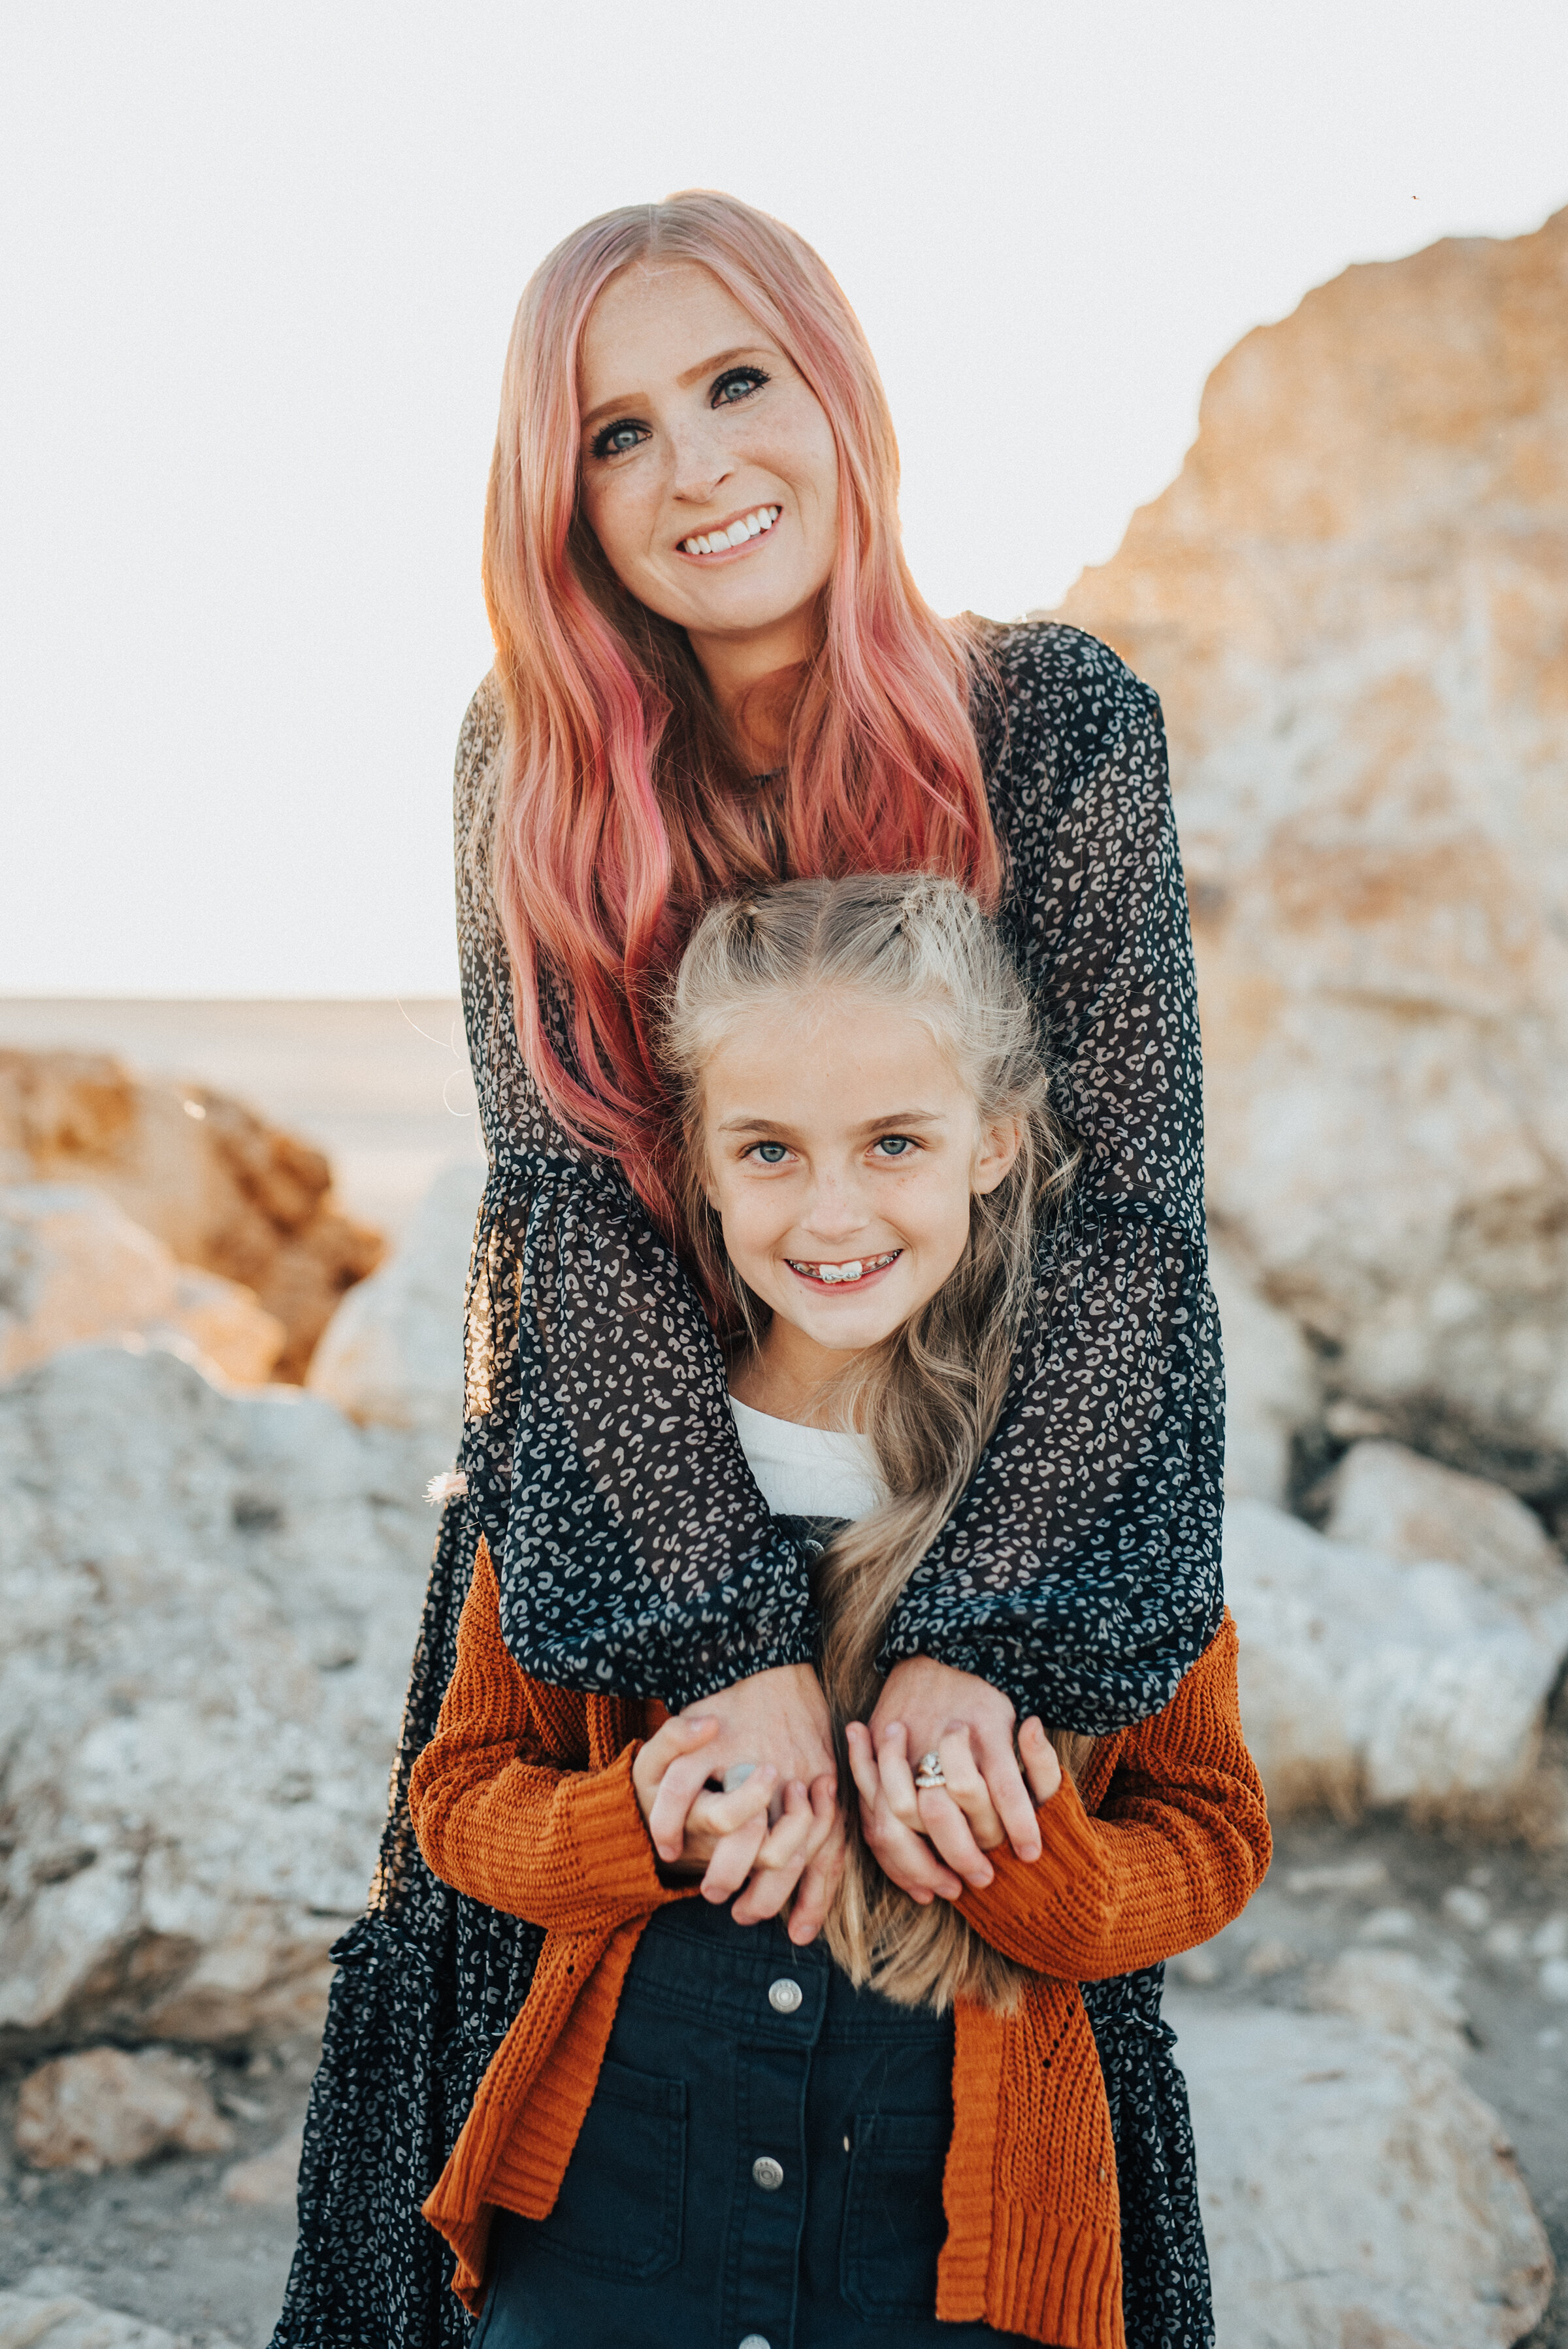  Darling shot of mother and daughter posing for family photographer Kristi Alyse Photography at Lady Finger Pointe near Antelope Island. Northen utah family photographer syracuse utah family pictures at antelope island pink hair mom and daughter french braids long hair pink hair family photos outfit inspiration #familypictures #utahphotographer #antelopeisland #outfitinspo #familypics #familyphotographer #pinkhair #saltlakecityphotog #slcfamilypictures 